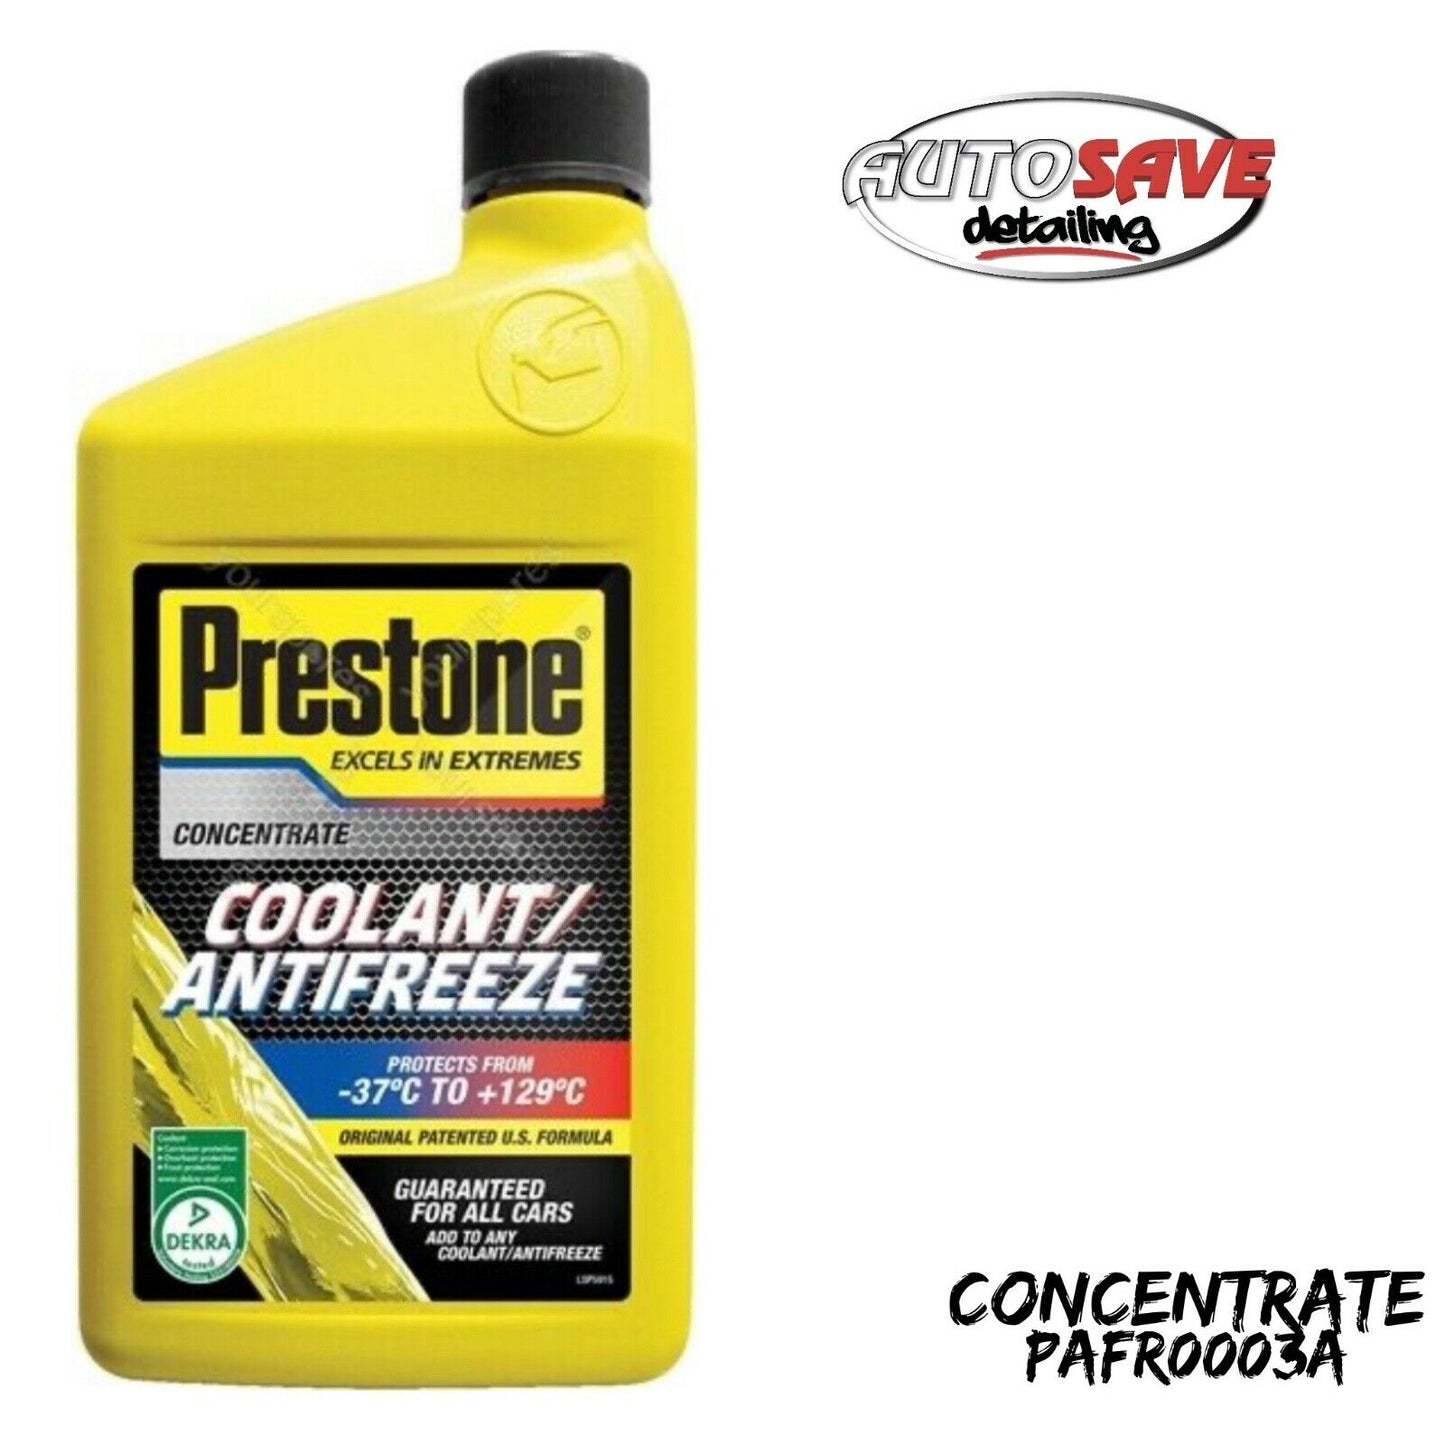 Prestone Concentrated Universal Anti Freeze Coolant Mixes With Any Antifreeze